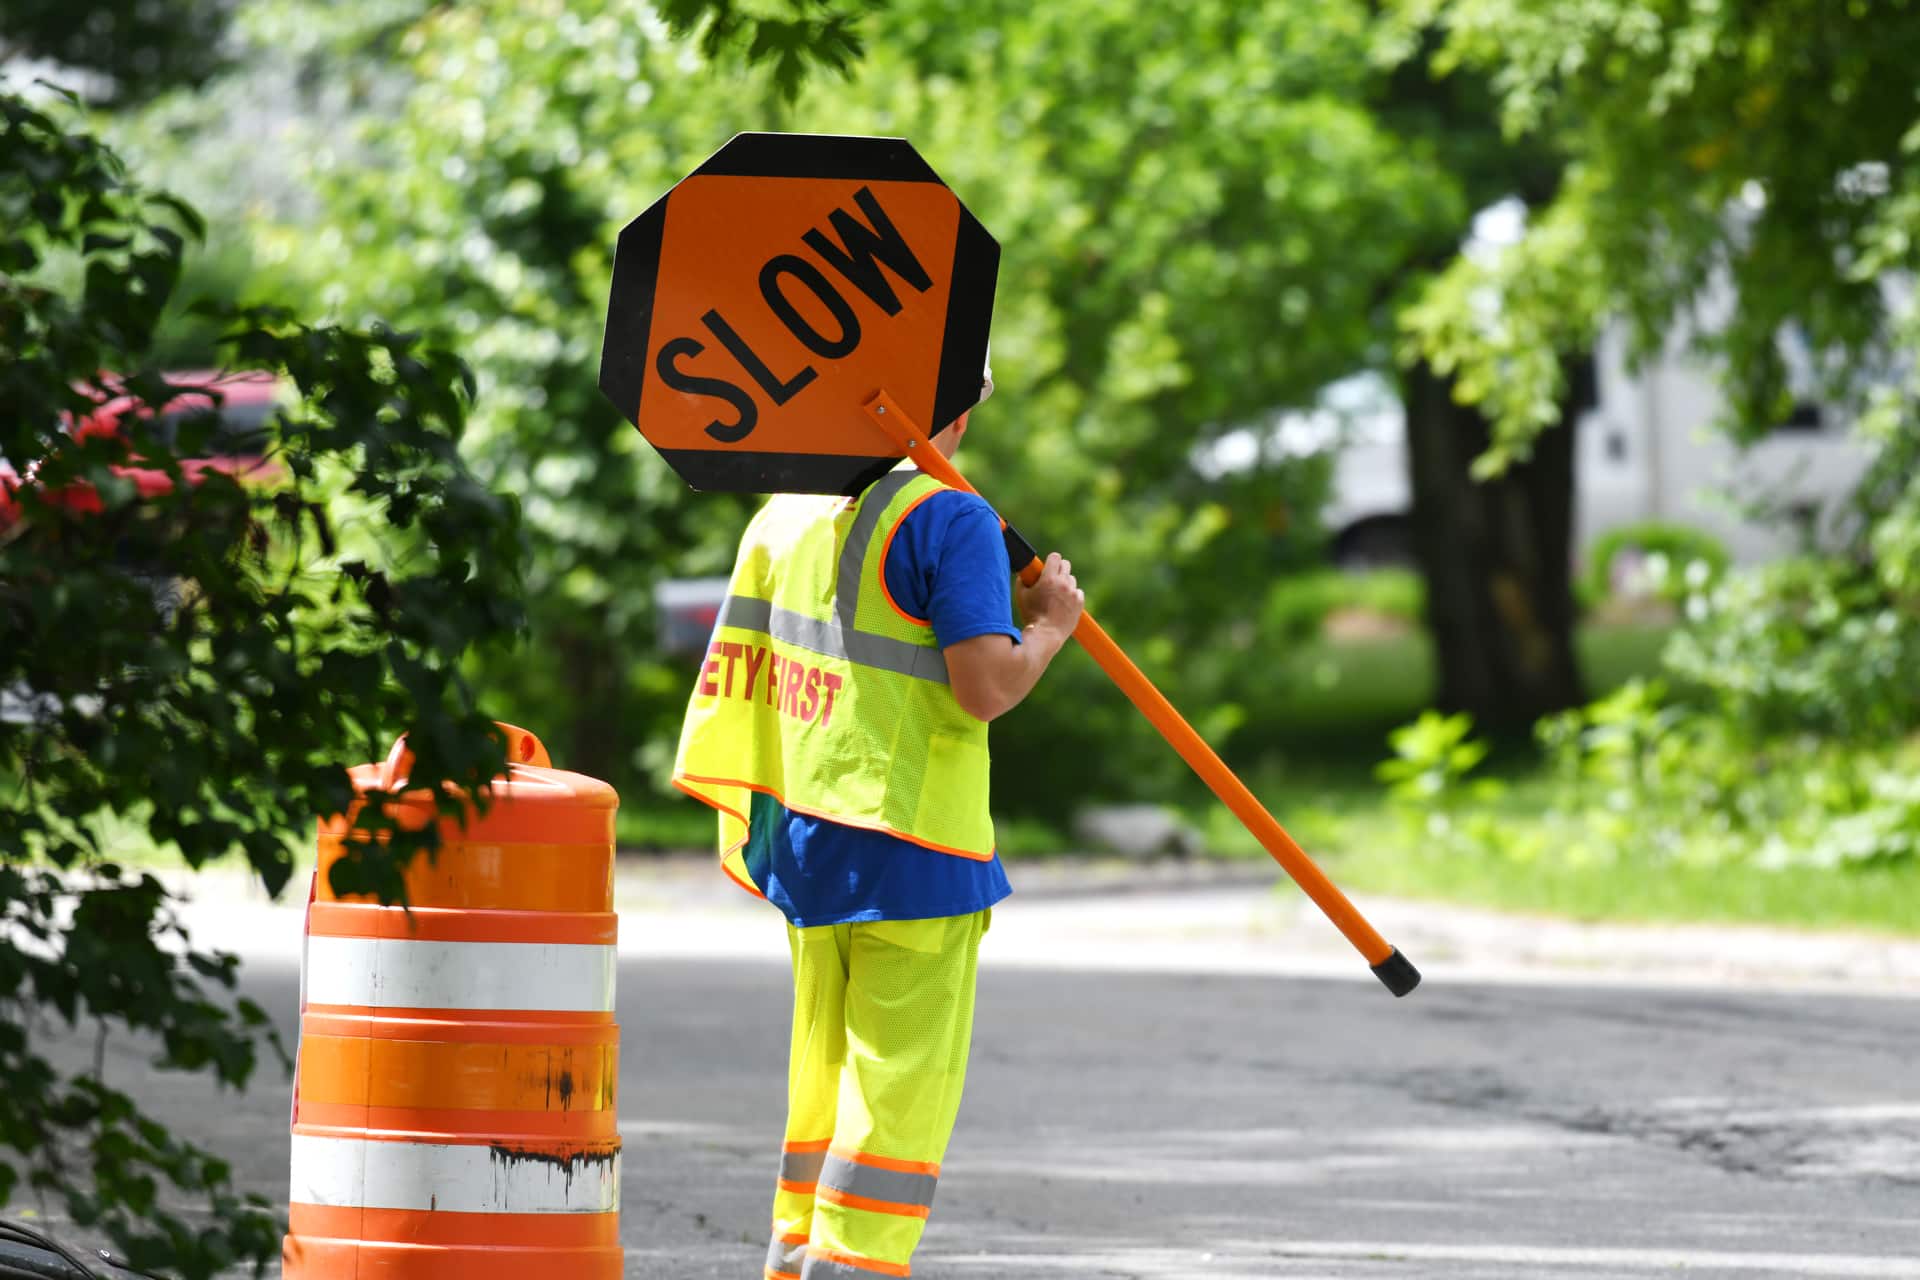 Bumpy Road Ahead for NY’s Public Works RBT CPAs, LLP